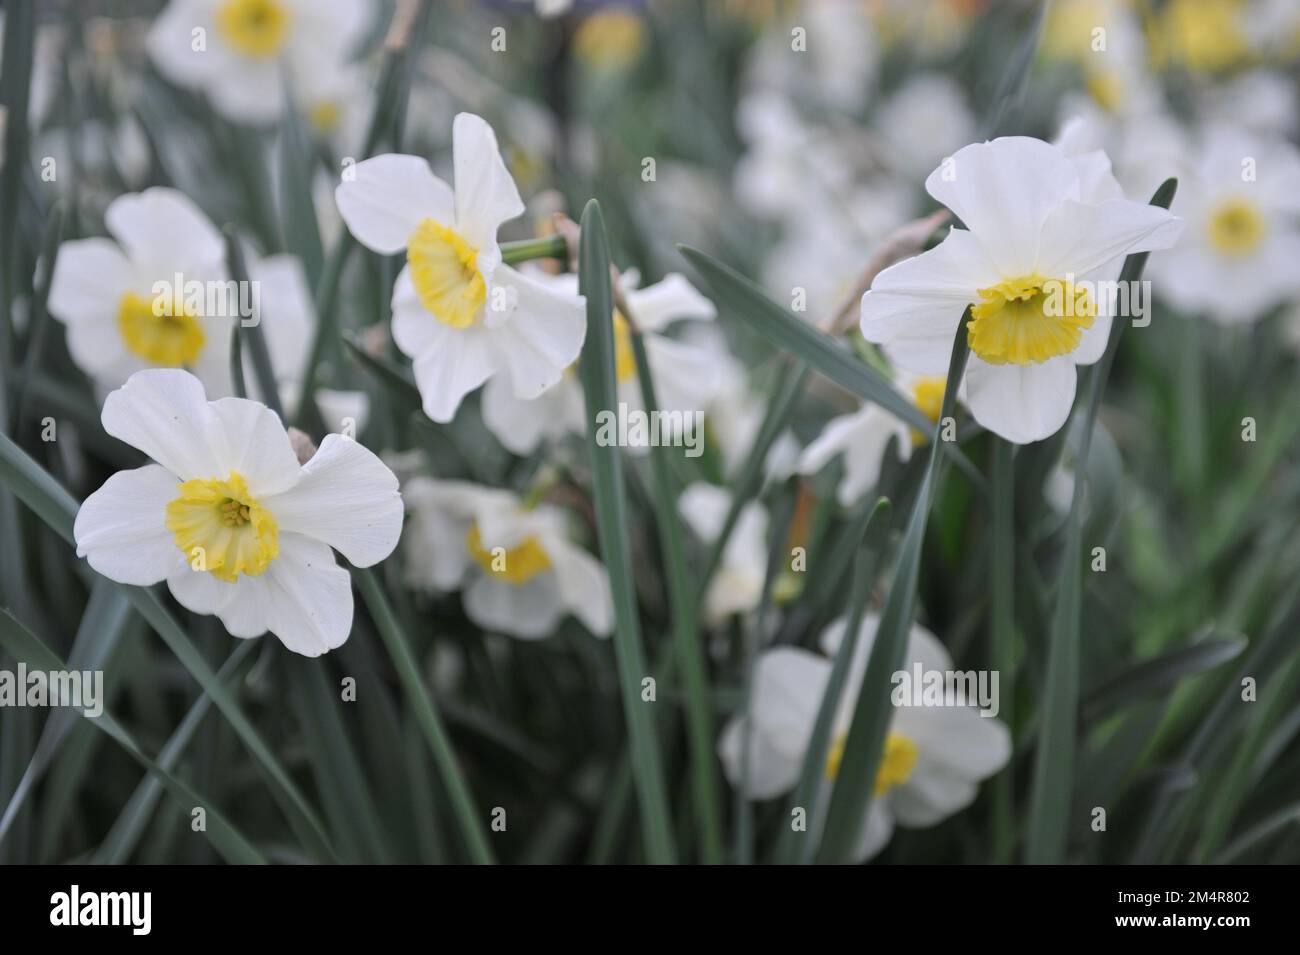 White and yellow Small-Cupped daffodils (Narcissus) Loth Lorien bloom in a garden in April Stock Photo